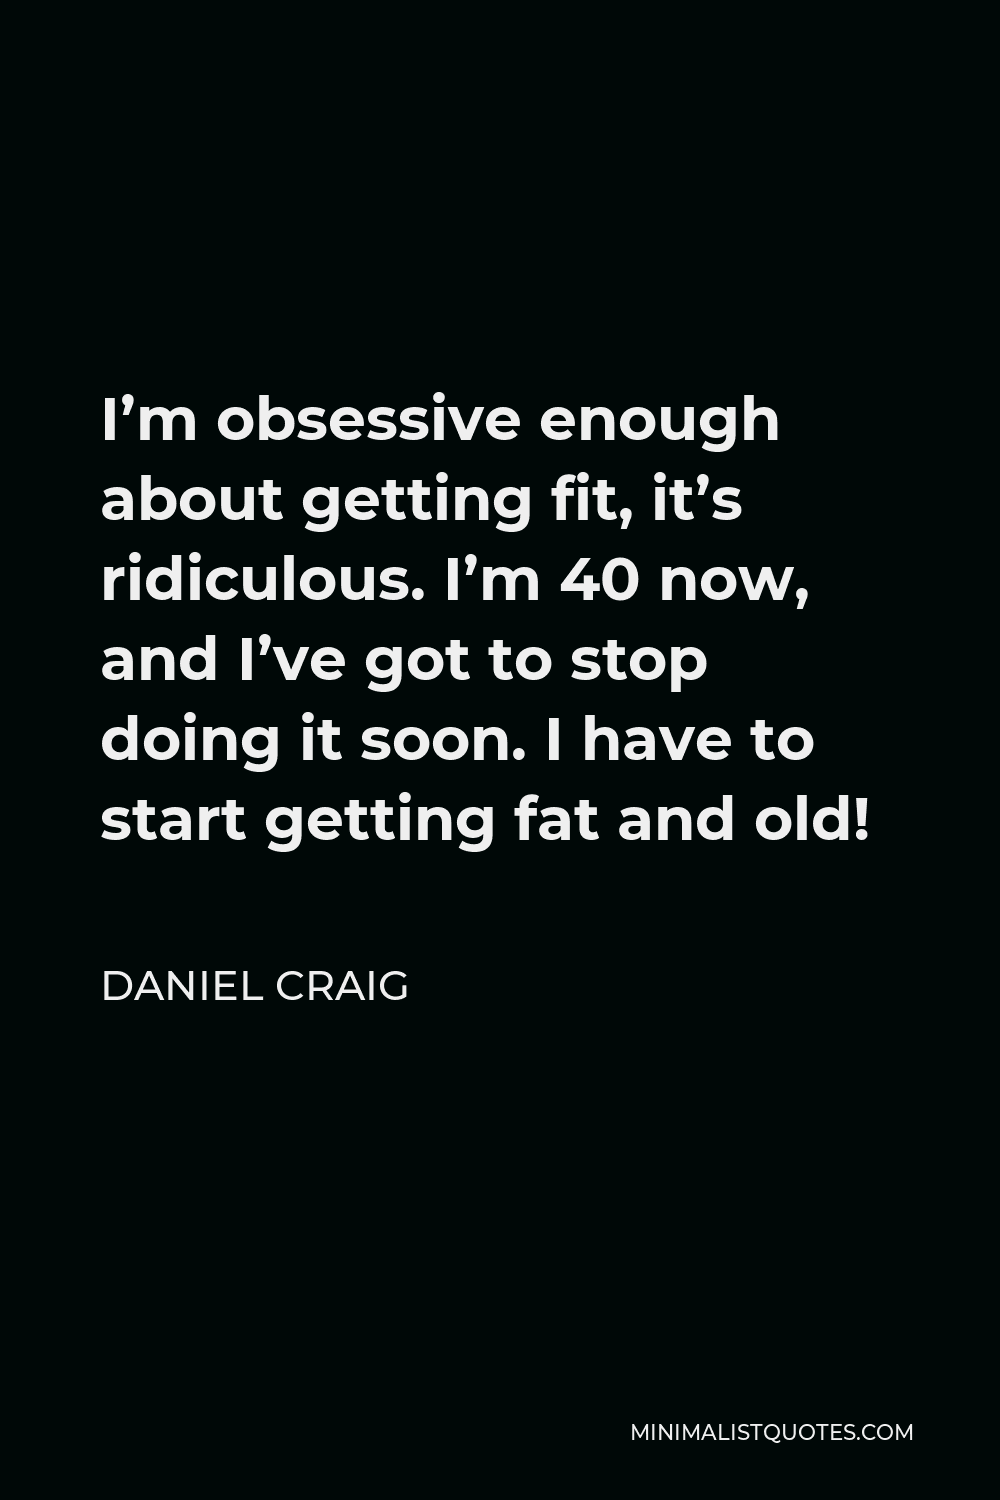 Daniel Craig Quote - I’m obsessive enough about getting fit, it’s ridiculous. I’m 40 now, and I’ve got to stop doing it soon. I have to start getting fat and old!